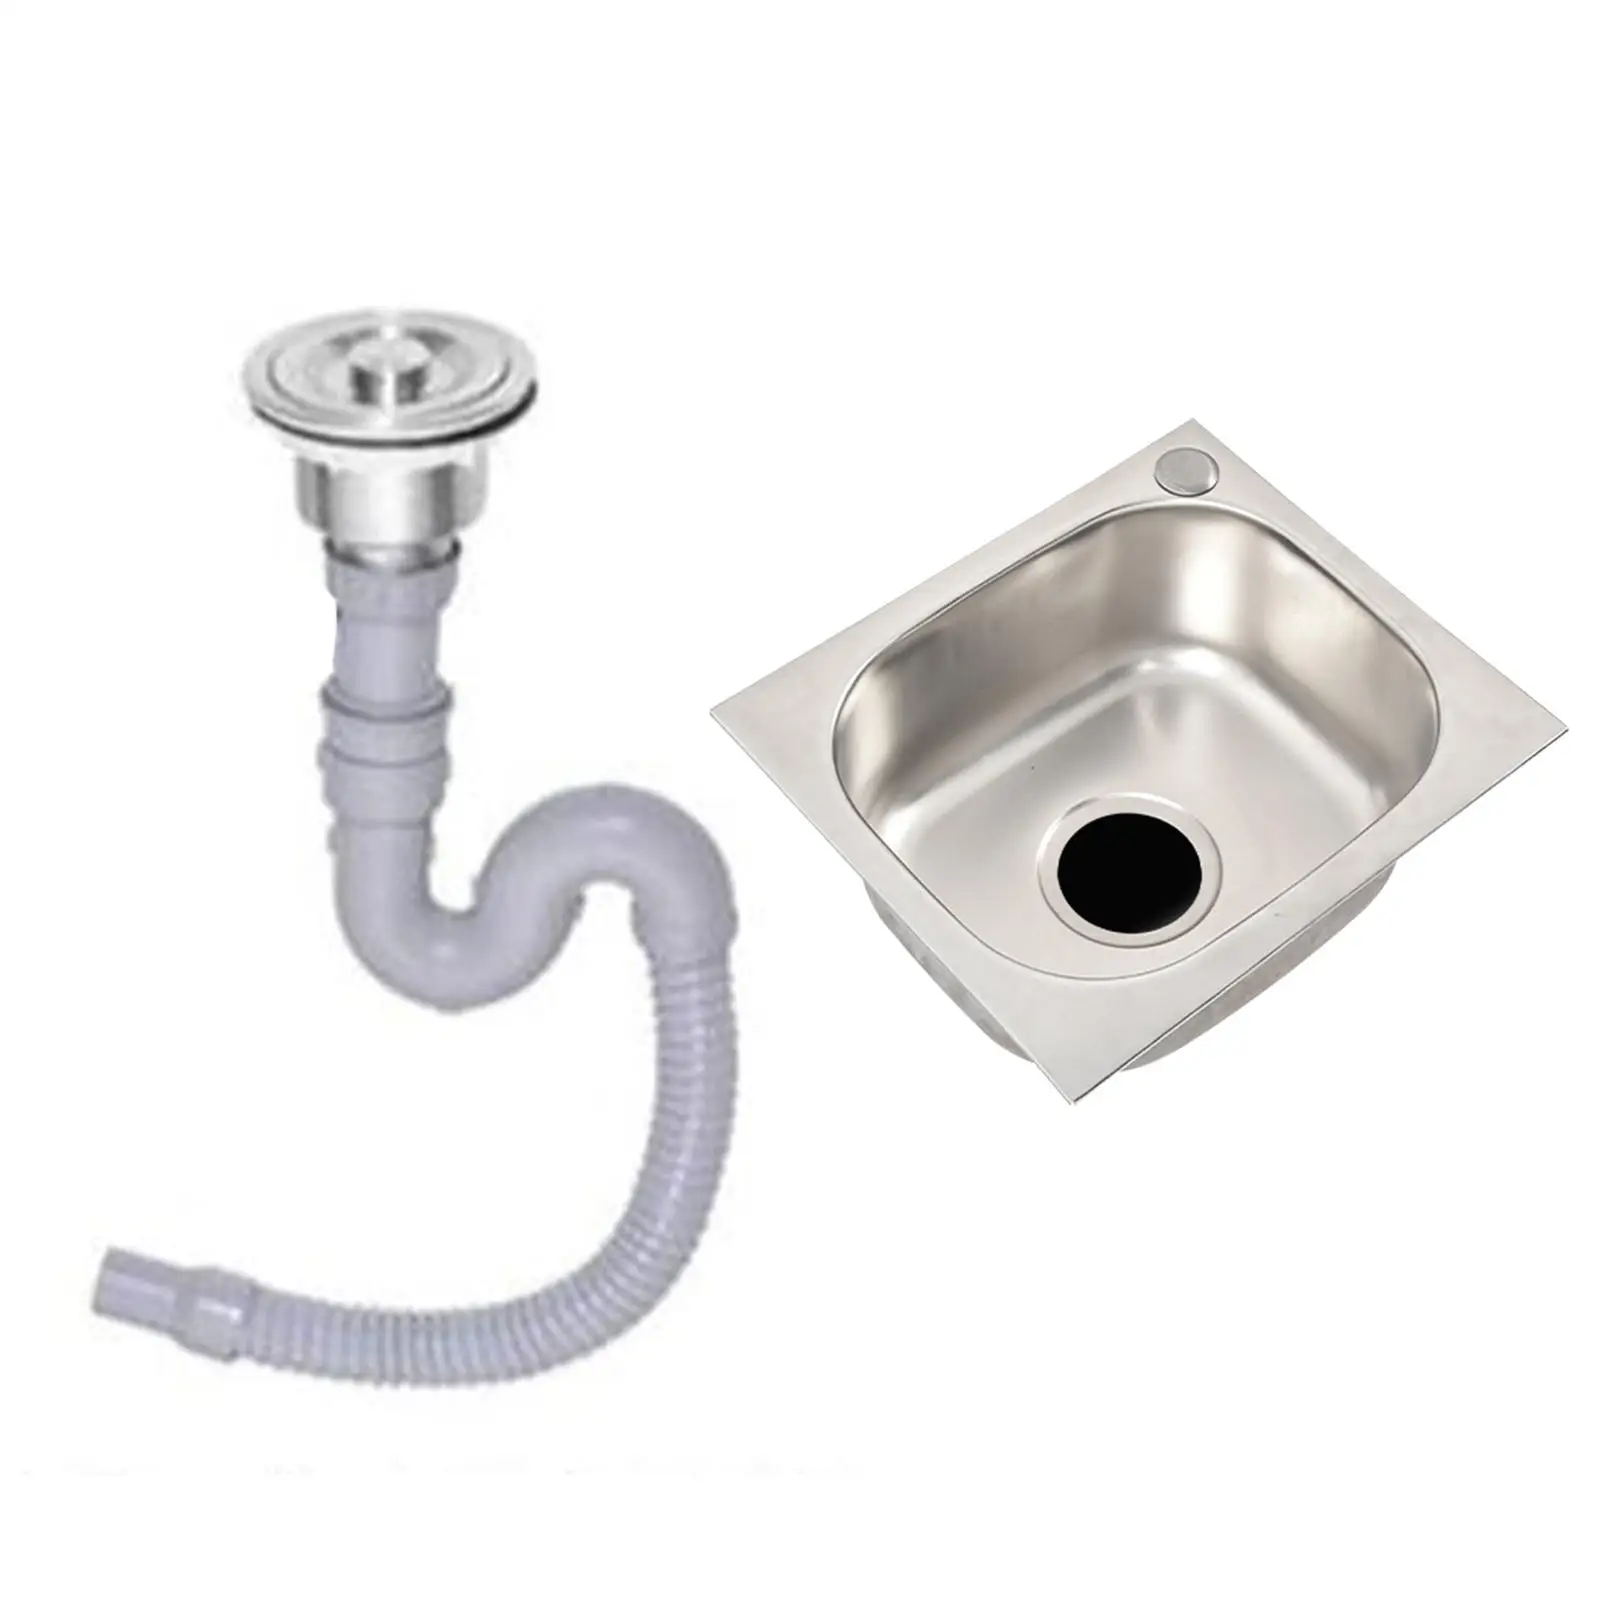 Topmount Kitchen Sink 37cmx32cmx14cm Heavy Duty Fast Drainage with Drain Hole Rectangle Rustproof with Water Pipe 5.5